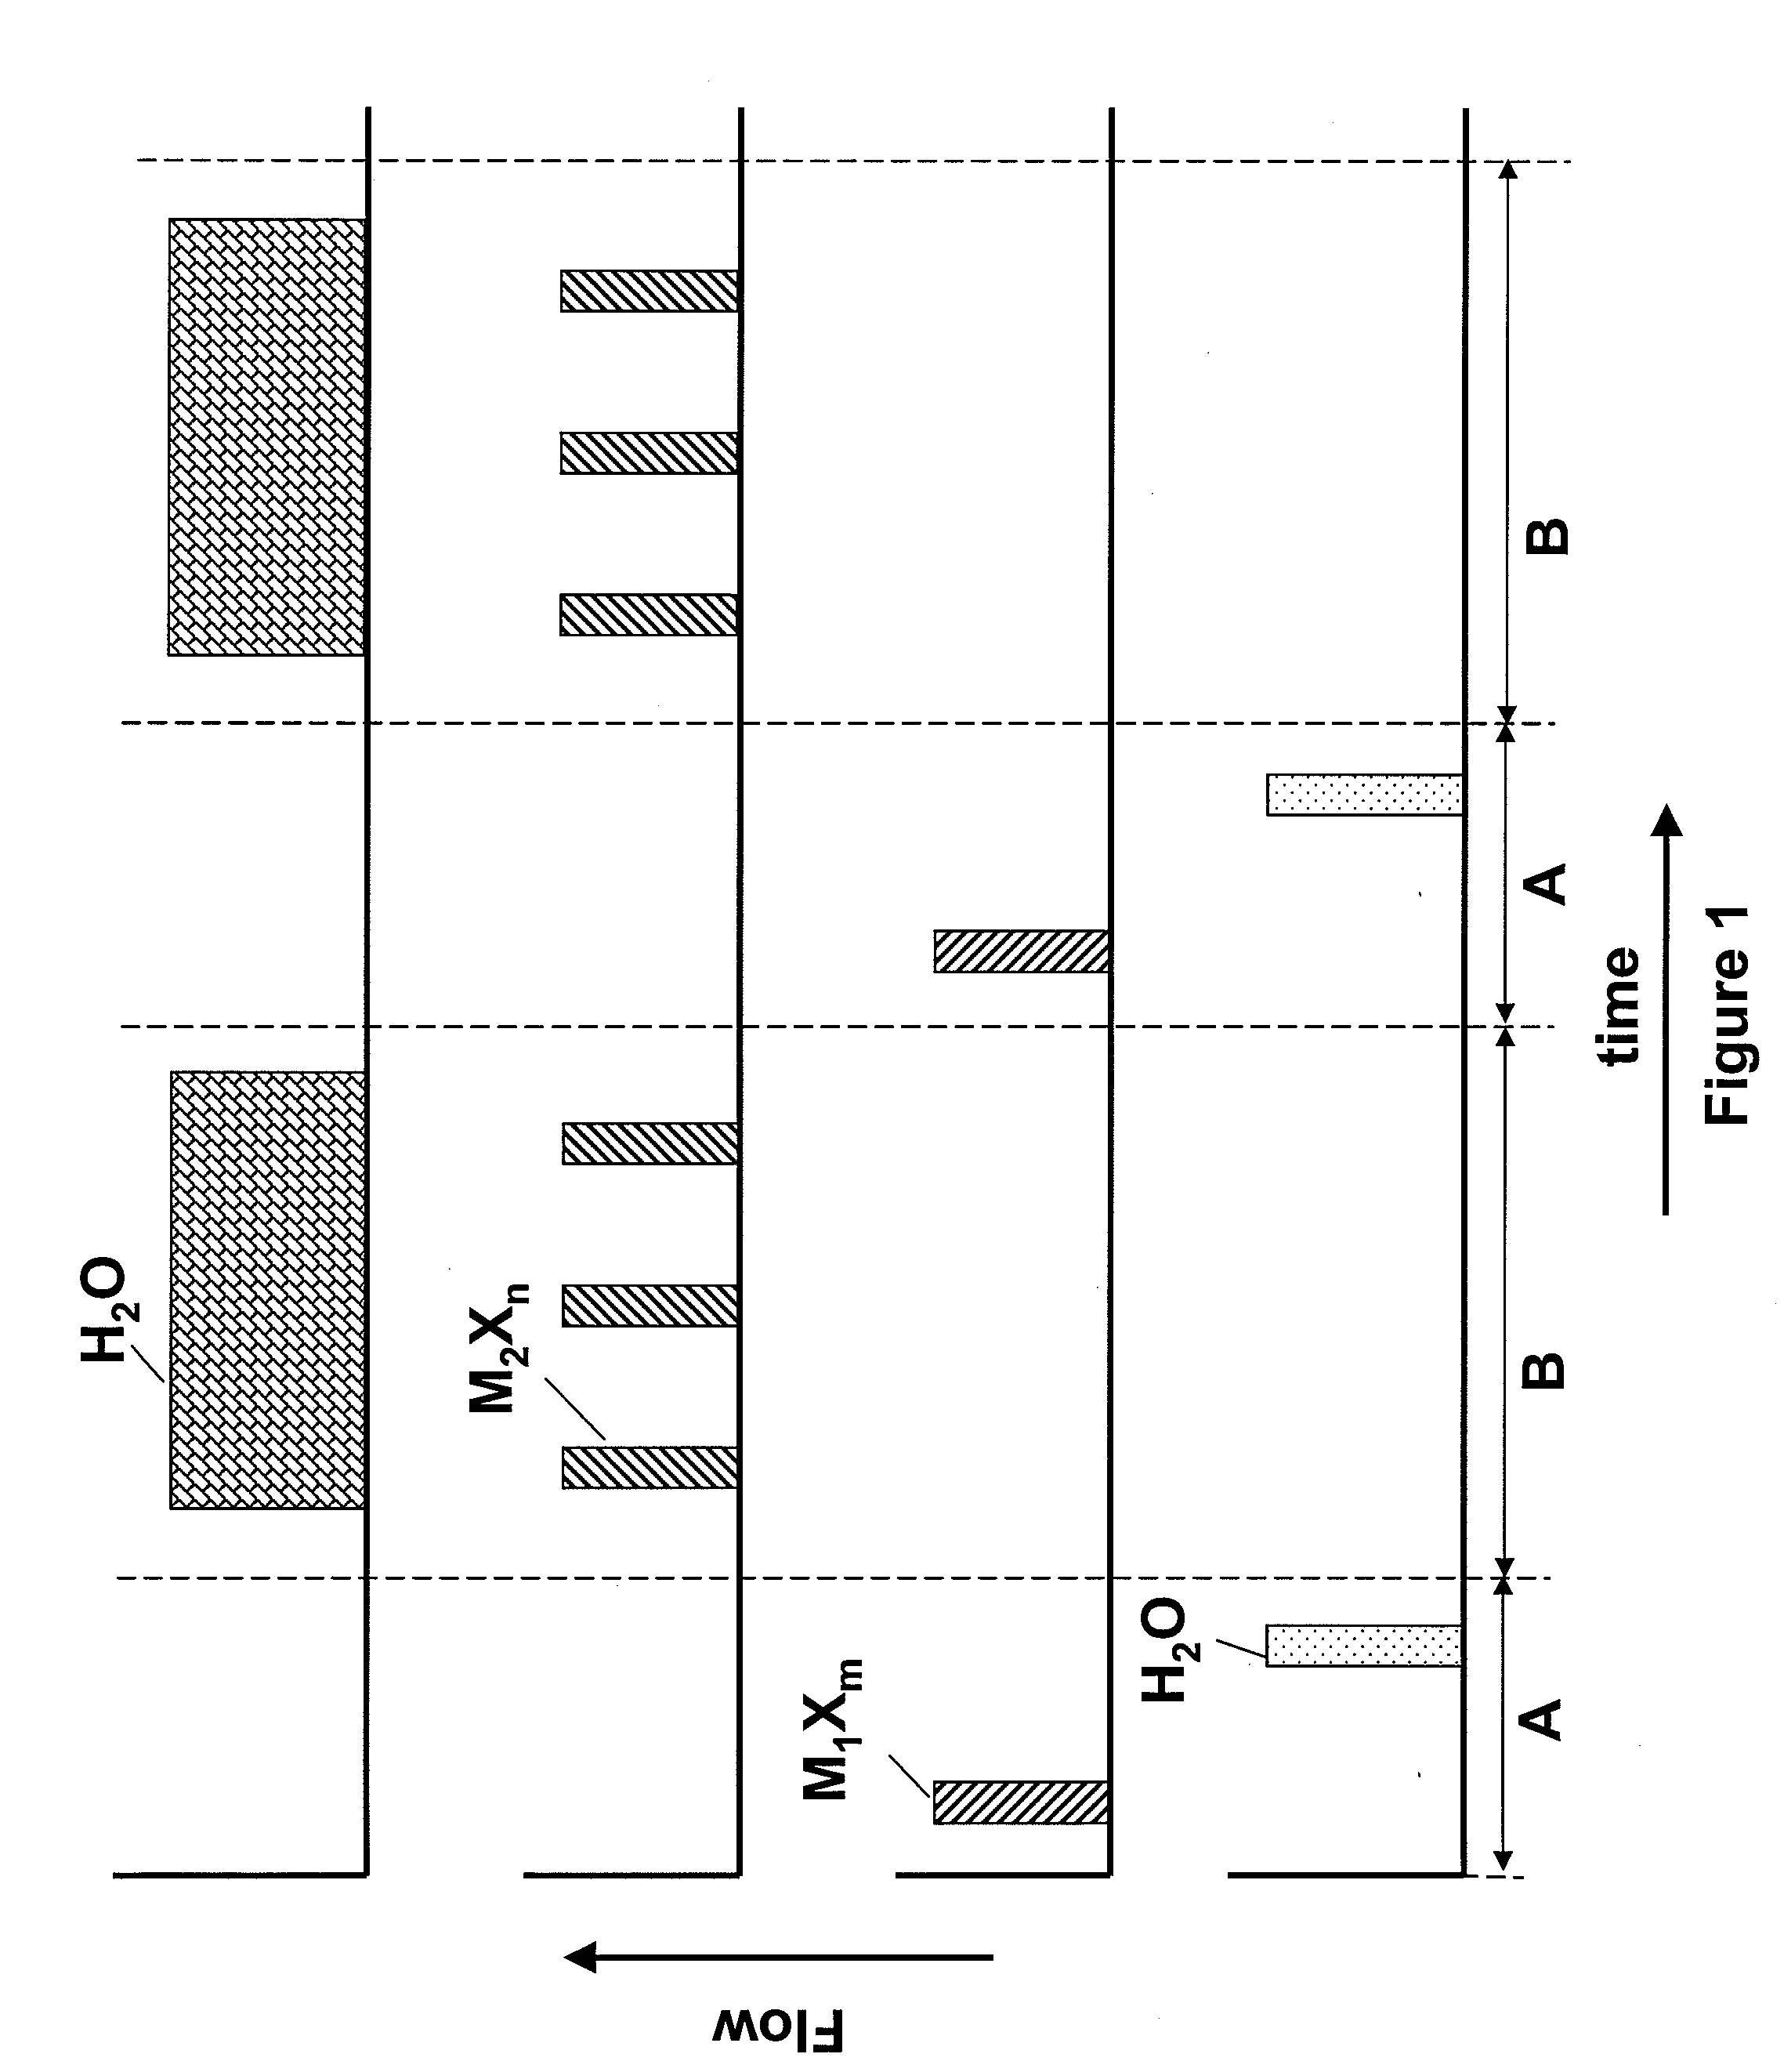 Method for depositing thin films by mixed pulsed CVD and ald